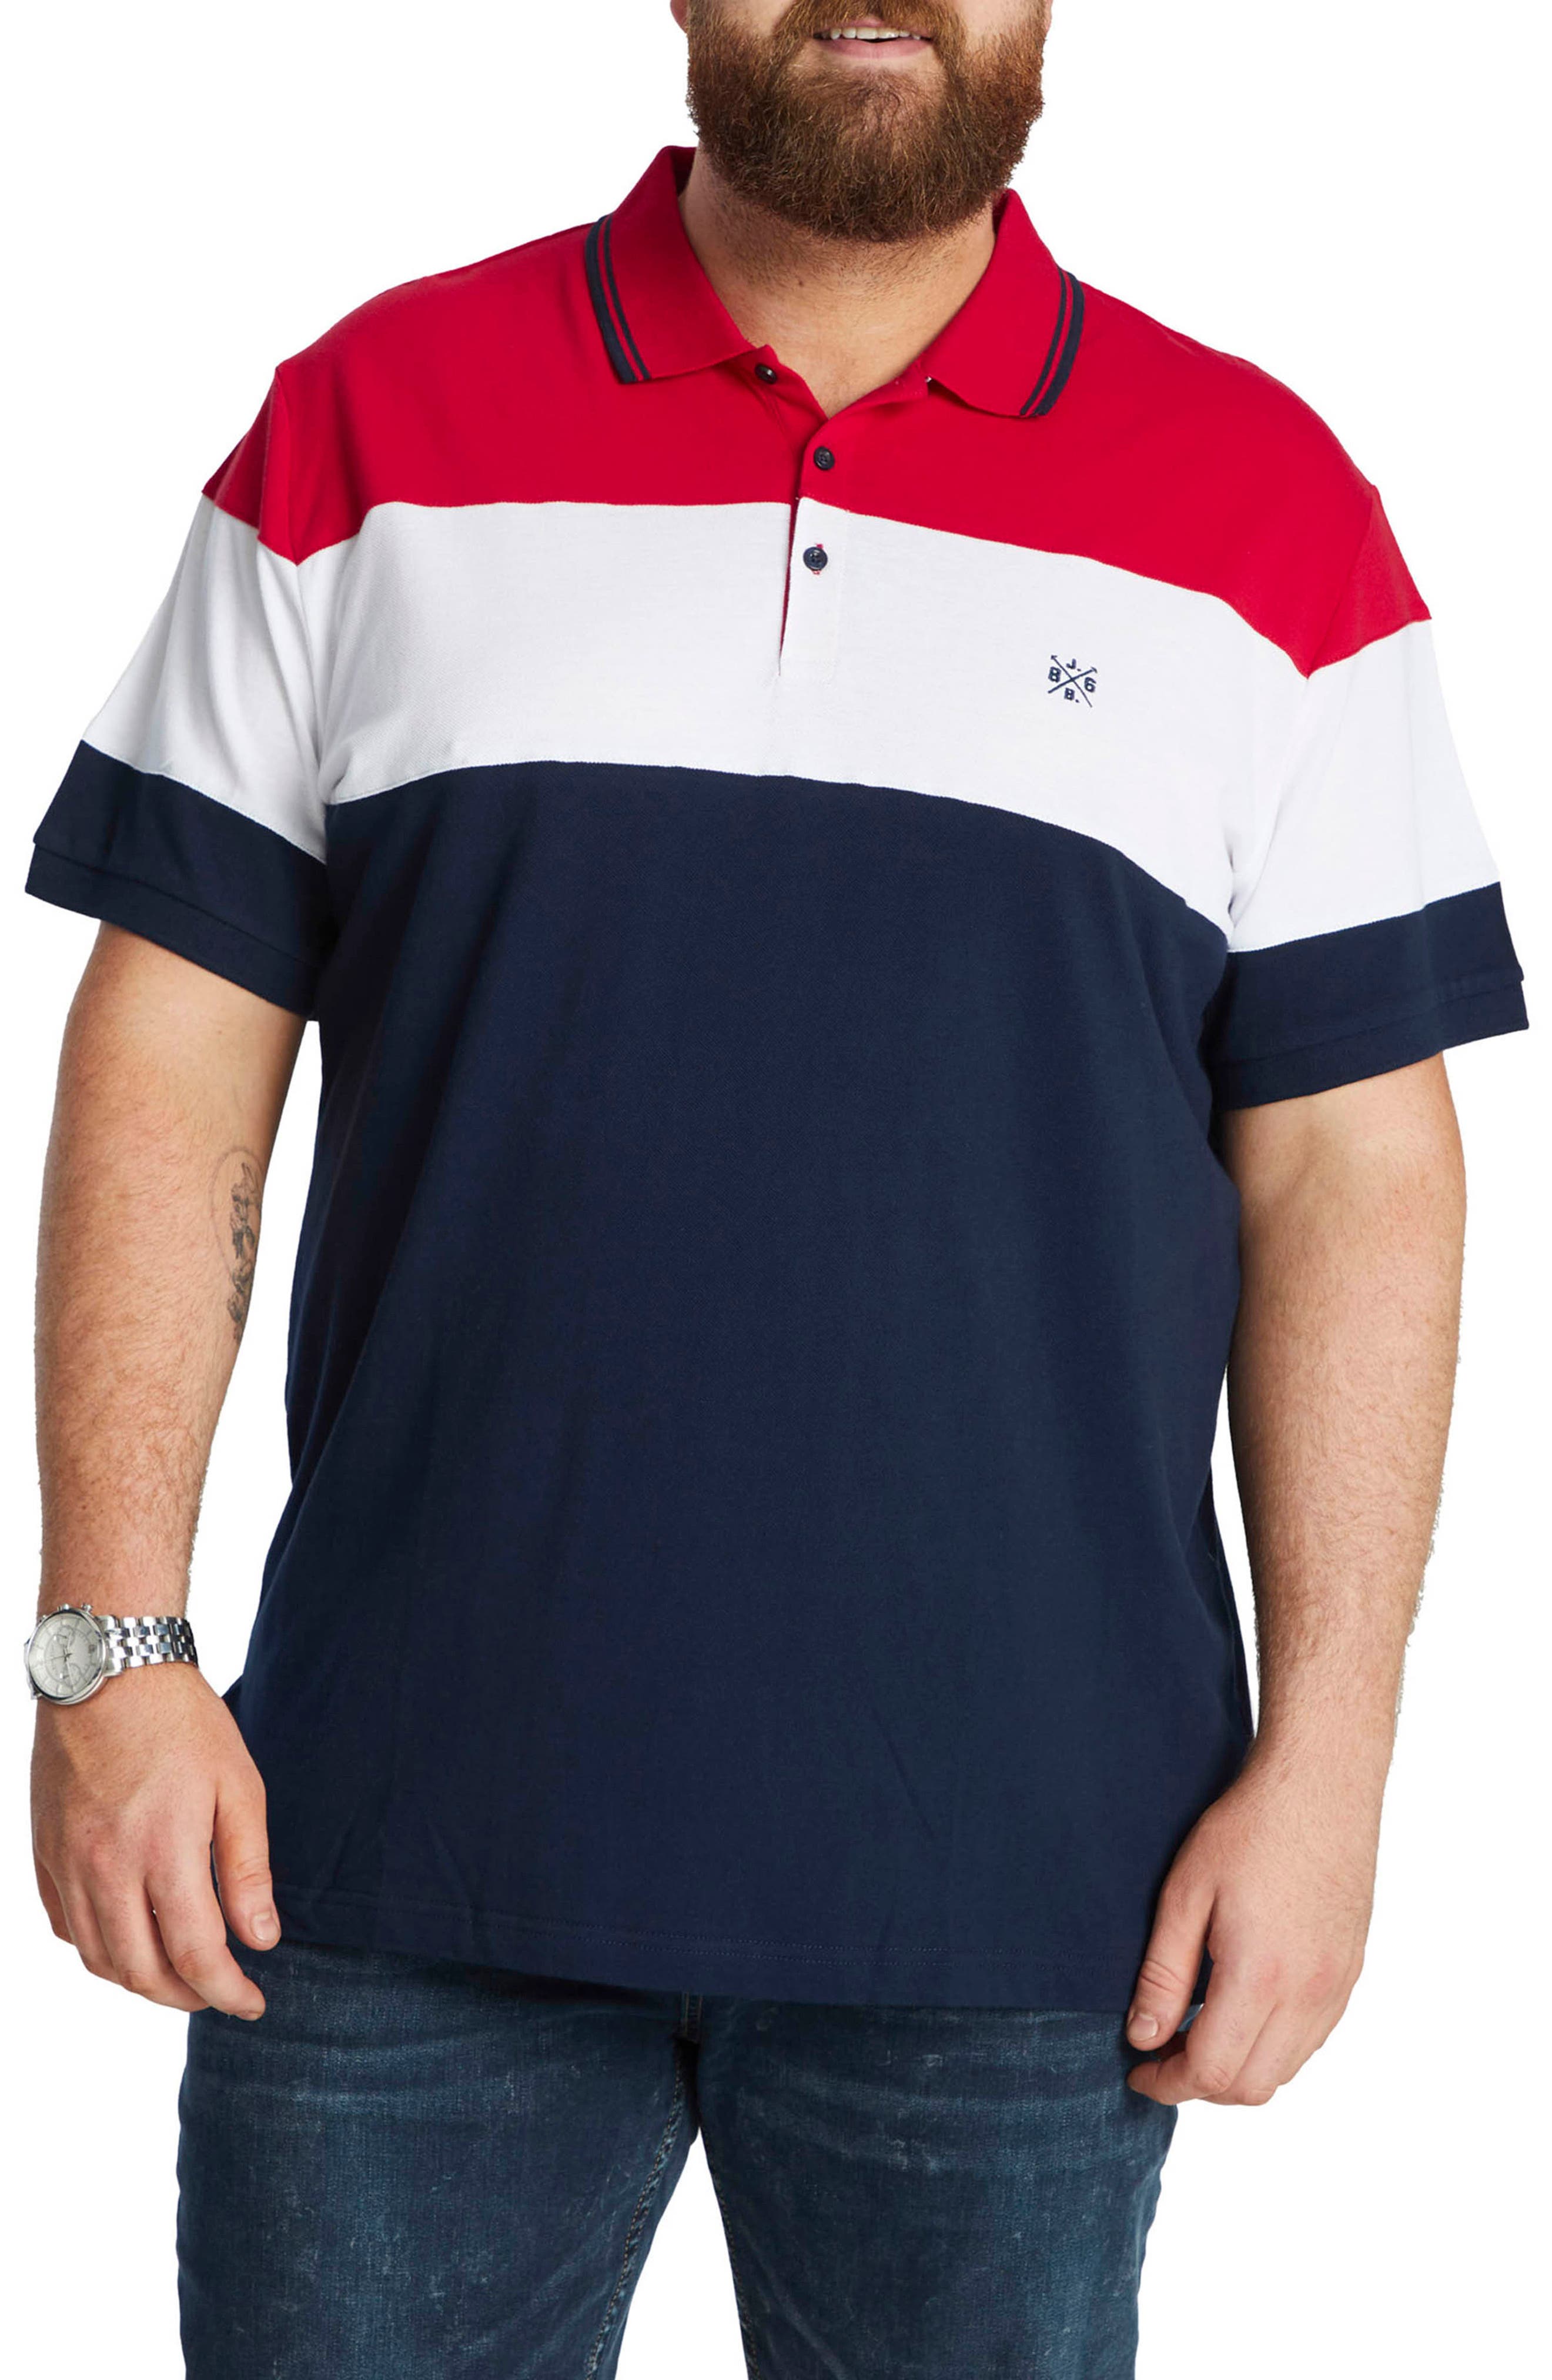 Johnny Bigg Dangerfield Colorblock Polo in Red at Nordstrom